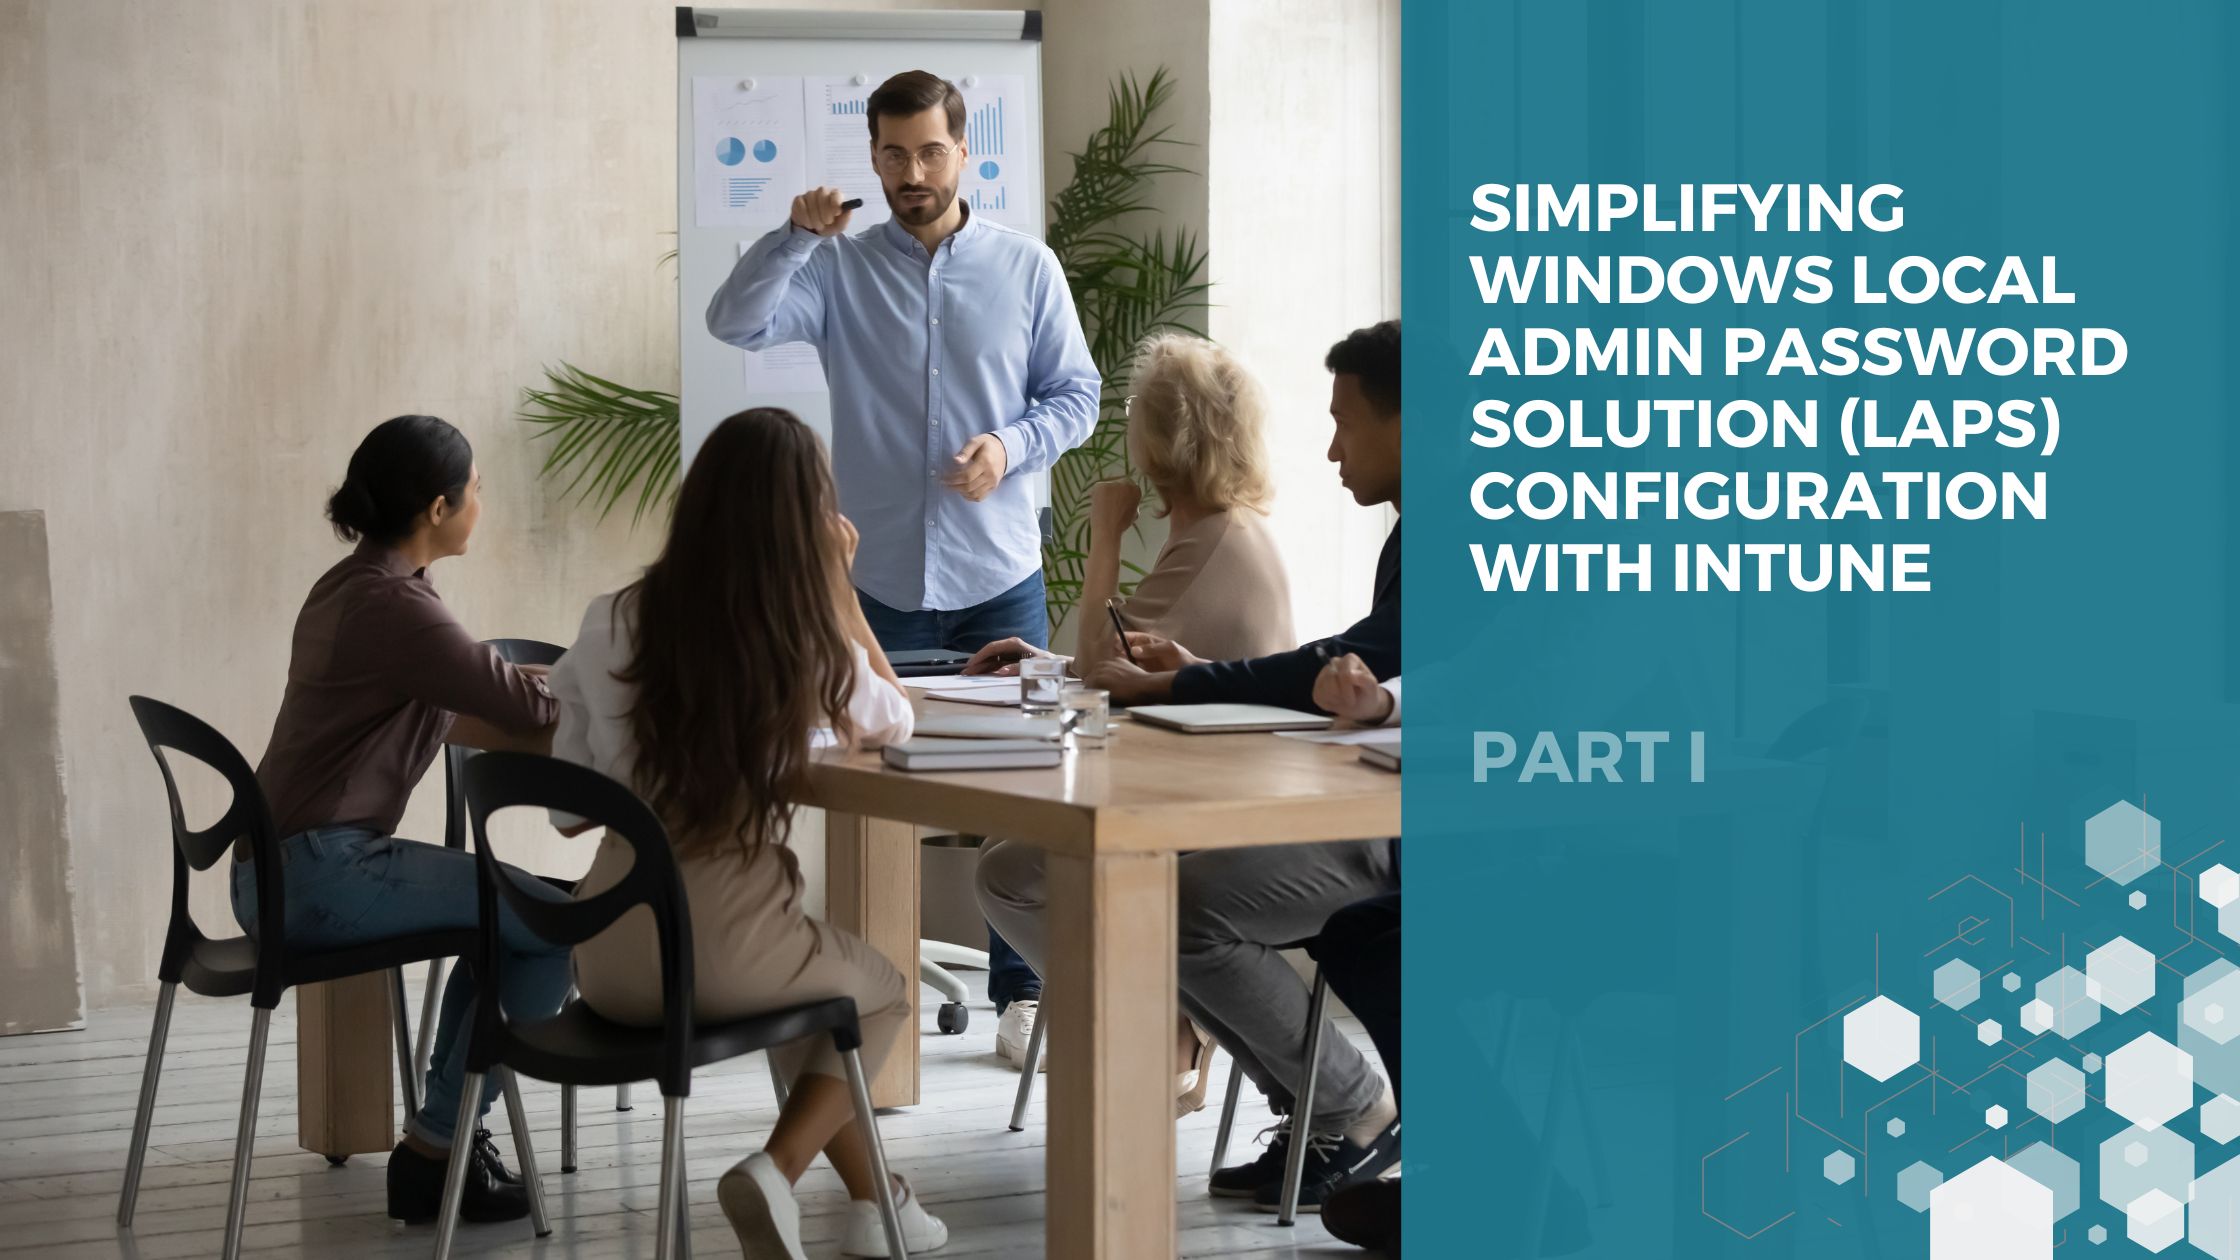 Simplifying Windows Local Administrator Password Solution (LAPS) Configuration with Intune. Part I